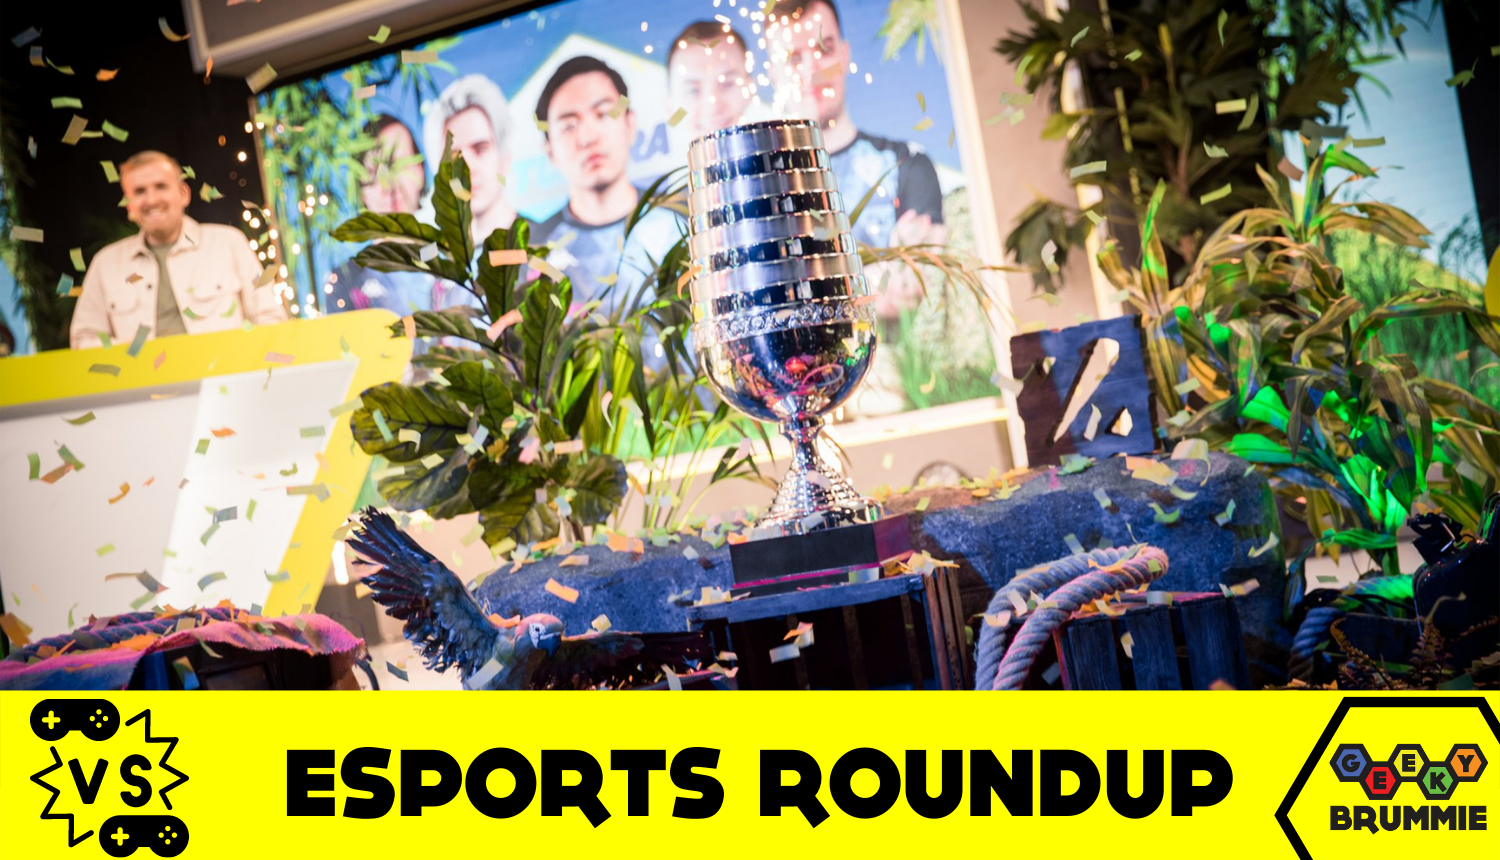 Esports Roundup: UK Dota, Wolves FC, and Women in Games Tournament